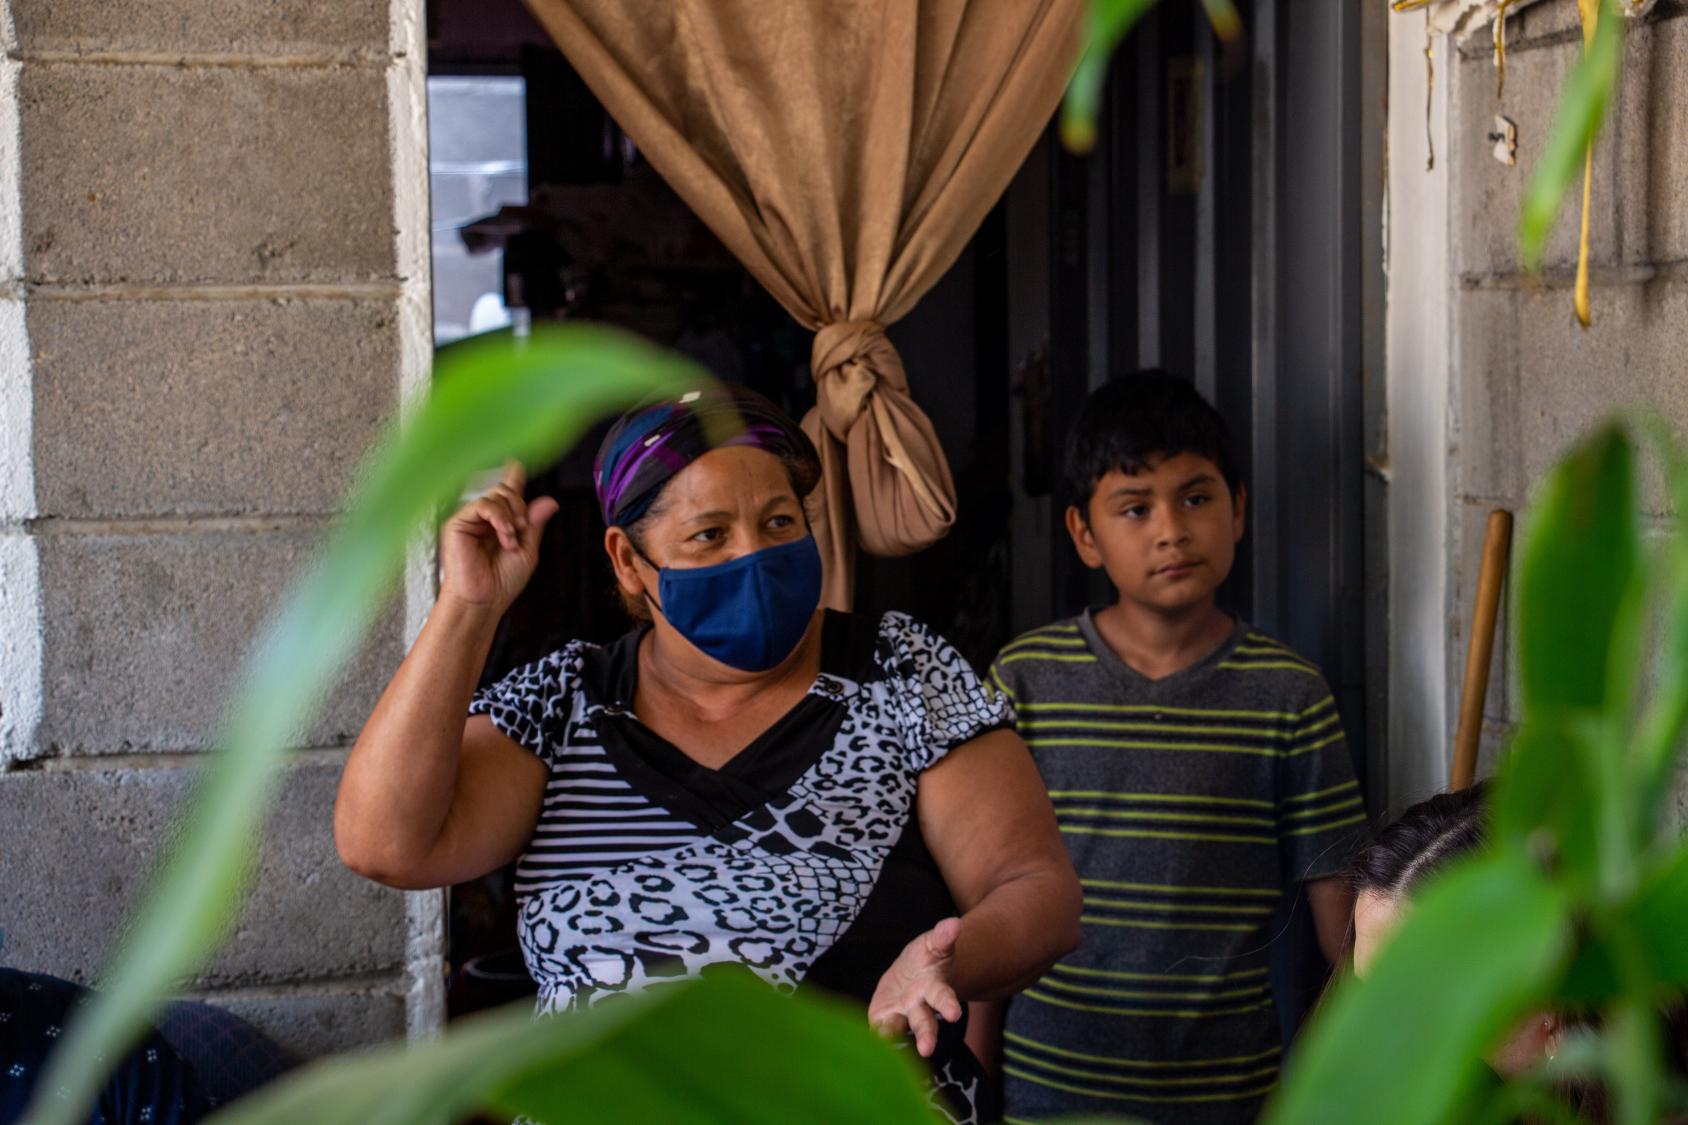 Outside the door of a house, a woman wearing a mask and a child talk to a person standing outside the shot.